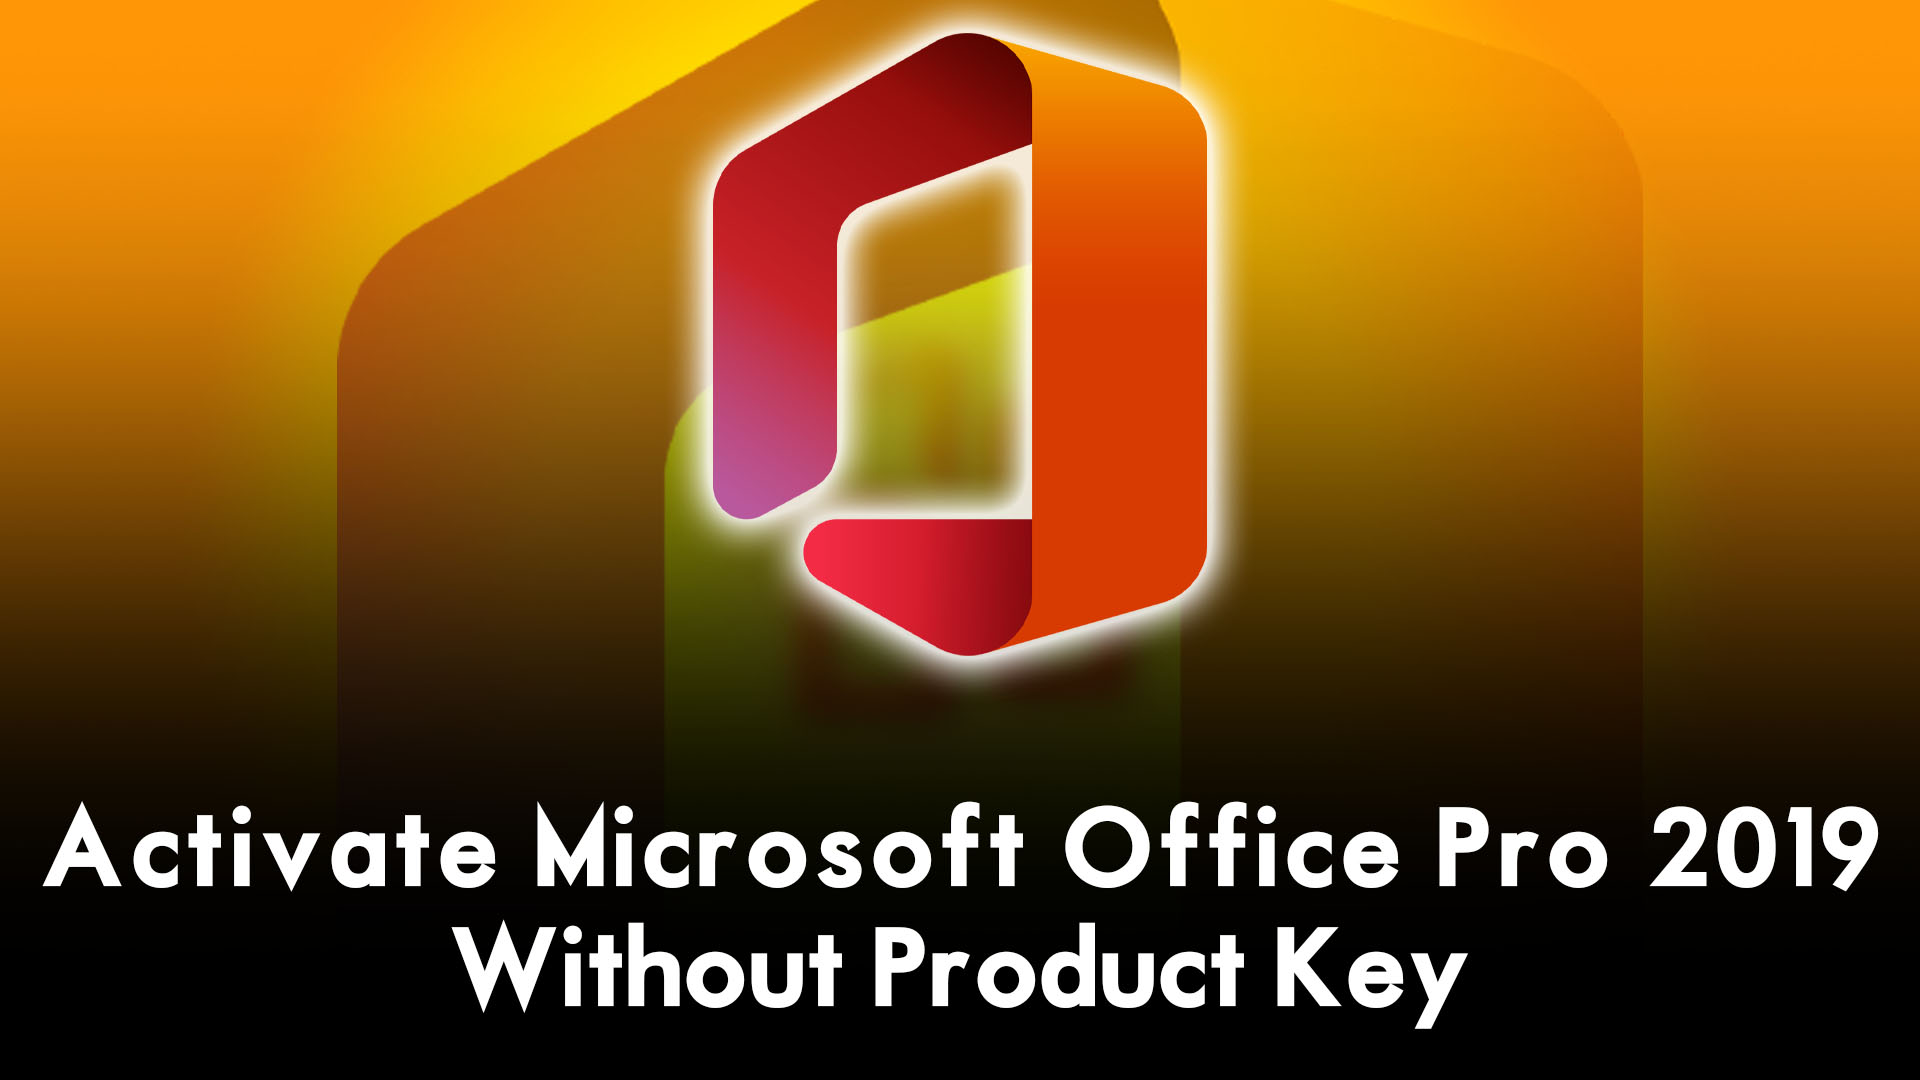 How To Activate Microsoft Office 2019 Pro Without Product Key 9645